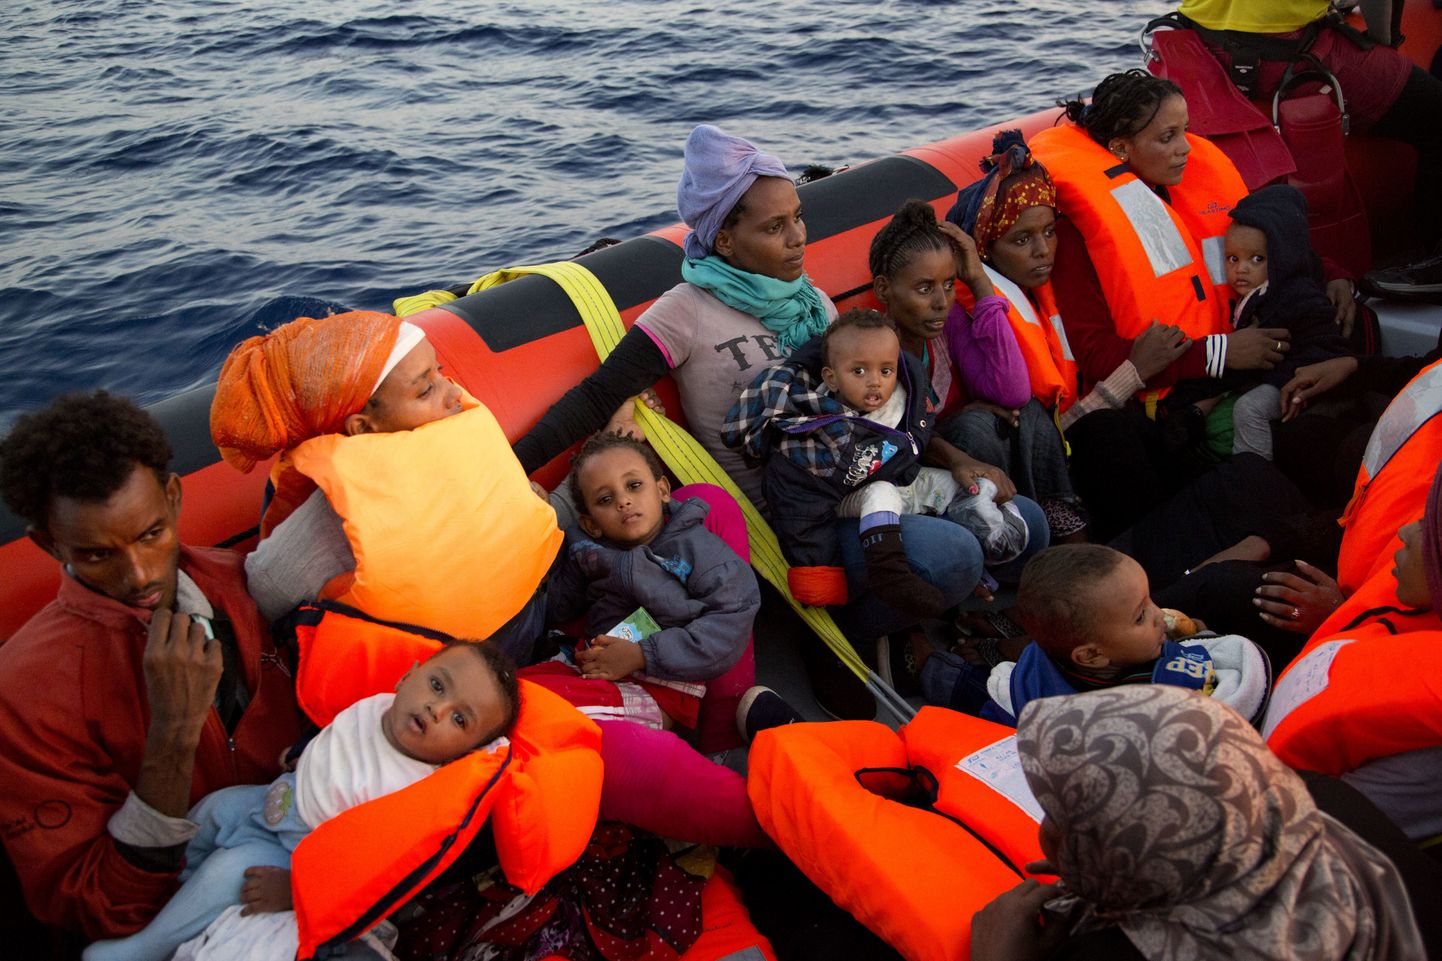 Migrants from Eritrea hold their children after been rescued from a crowded wooden boat as they were fleeing Libya, during a rescue operation in the Mediterranean sea, about 13 miles north of Sabratha, Libya, Monday, Aug. 29, 2016. Thousands of migrants and refugees were rescued Monday morning from more than 20 boats by members of Proactiva Open Arms NGO before transferring them to the Italian cost guards and others NGO vessels operating in the zone.(AP Photo/Emilio Morenatti)